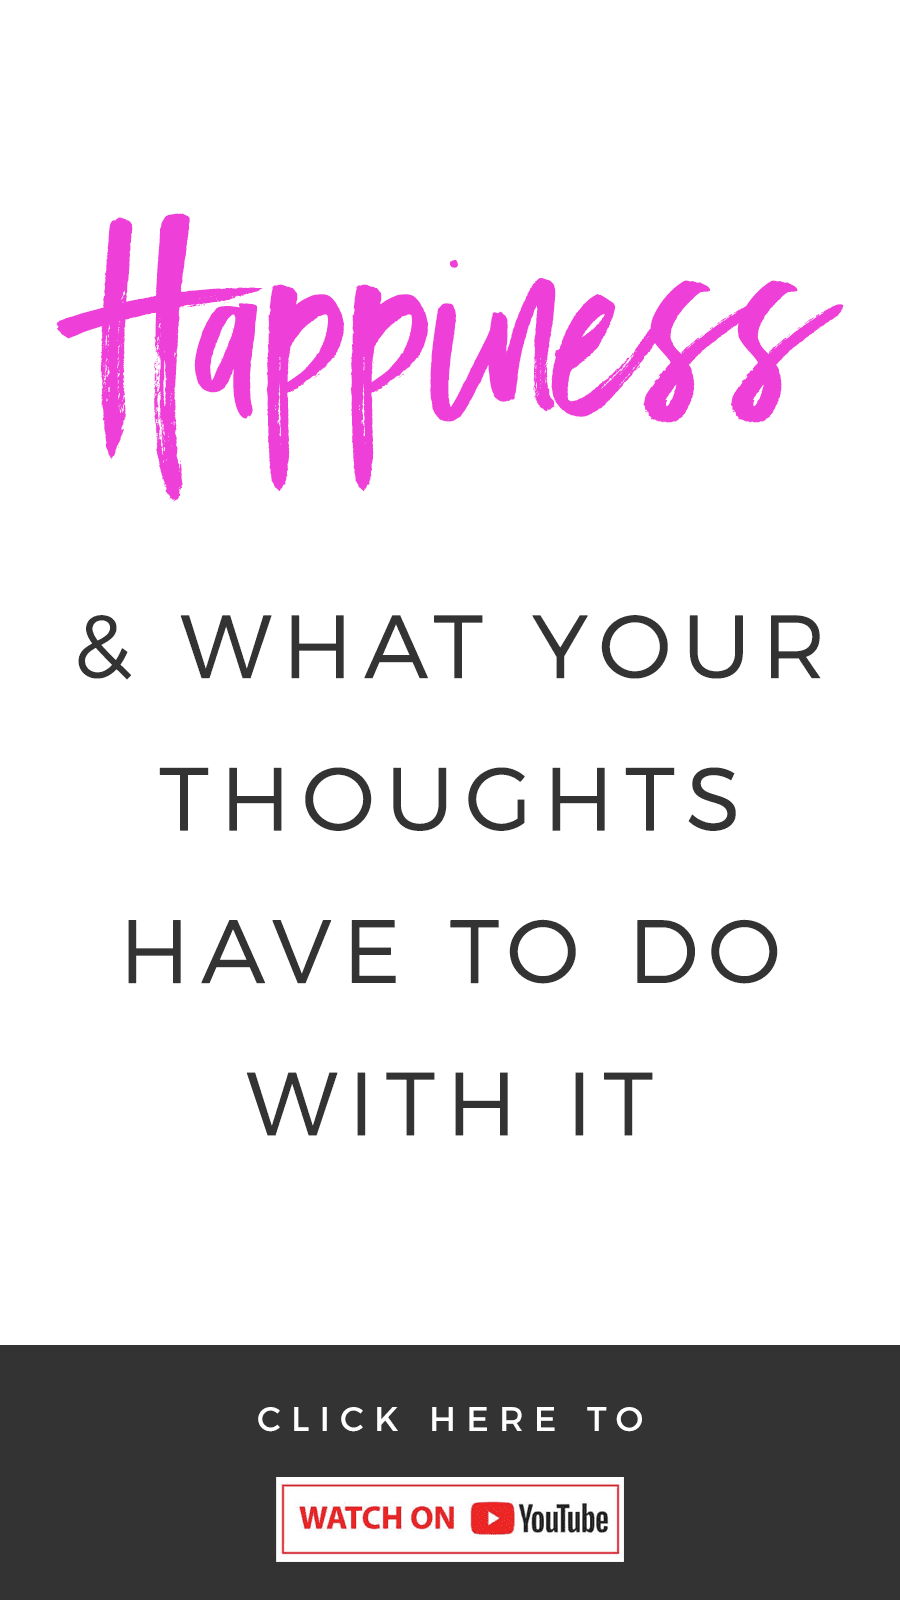 Happiness & What Your Thoughts Have To Do With It